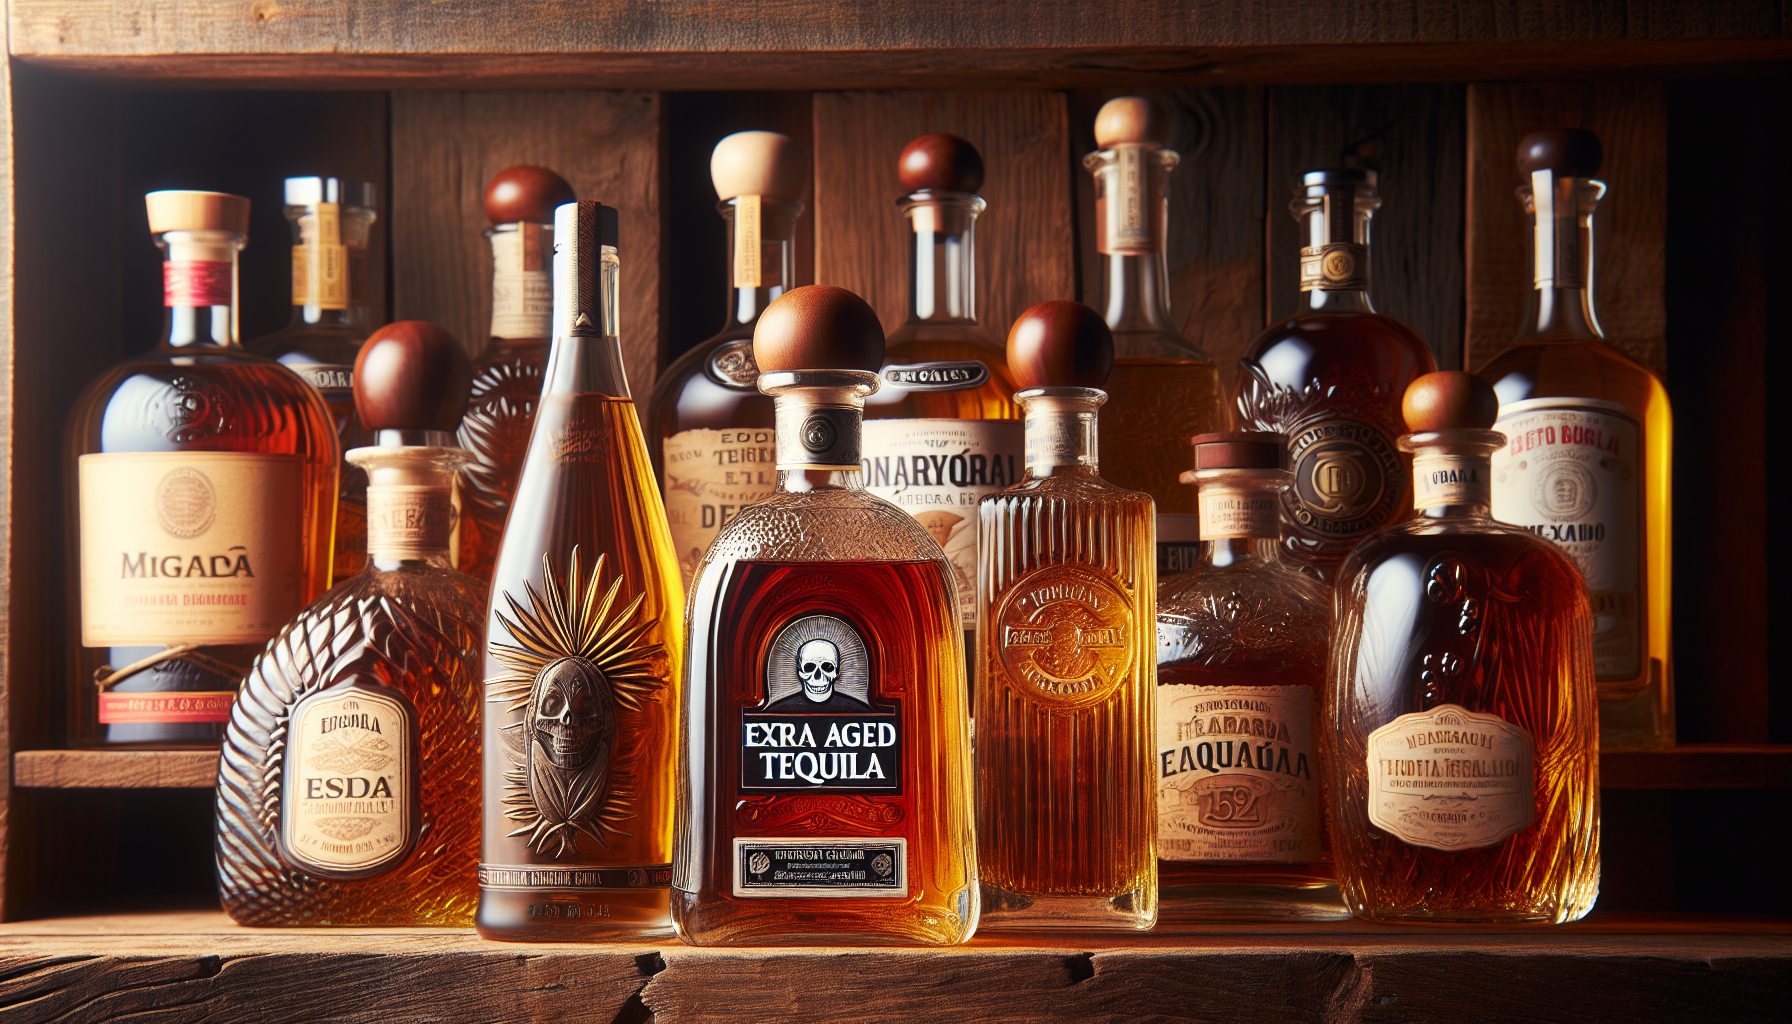 Selection of extra añejo tequila bottles from top brands